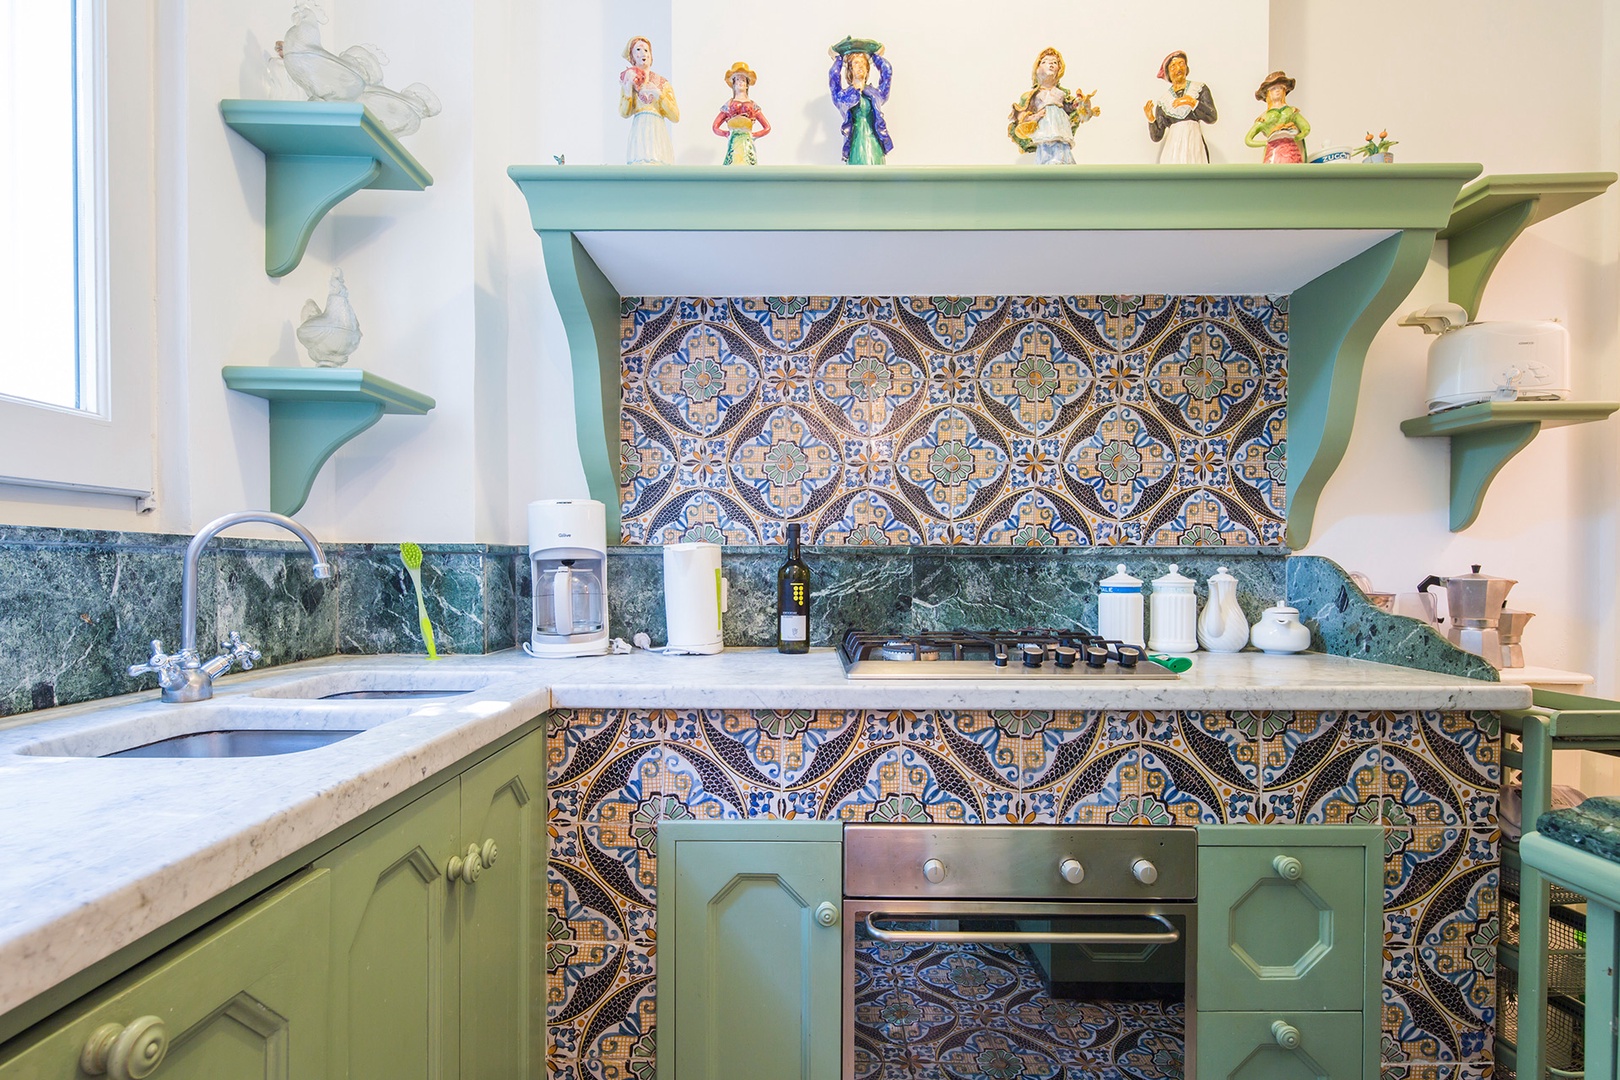 Beautiful tilework in fully equipped kitchen.